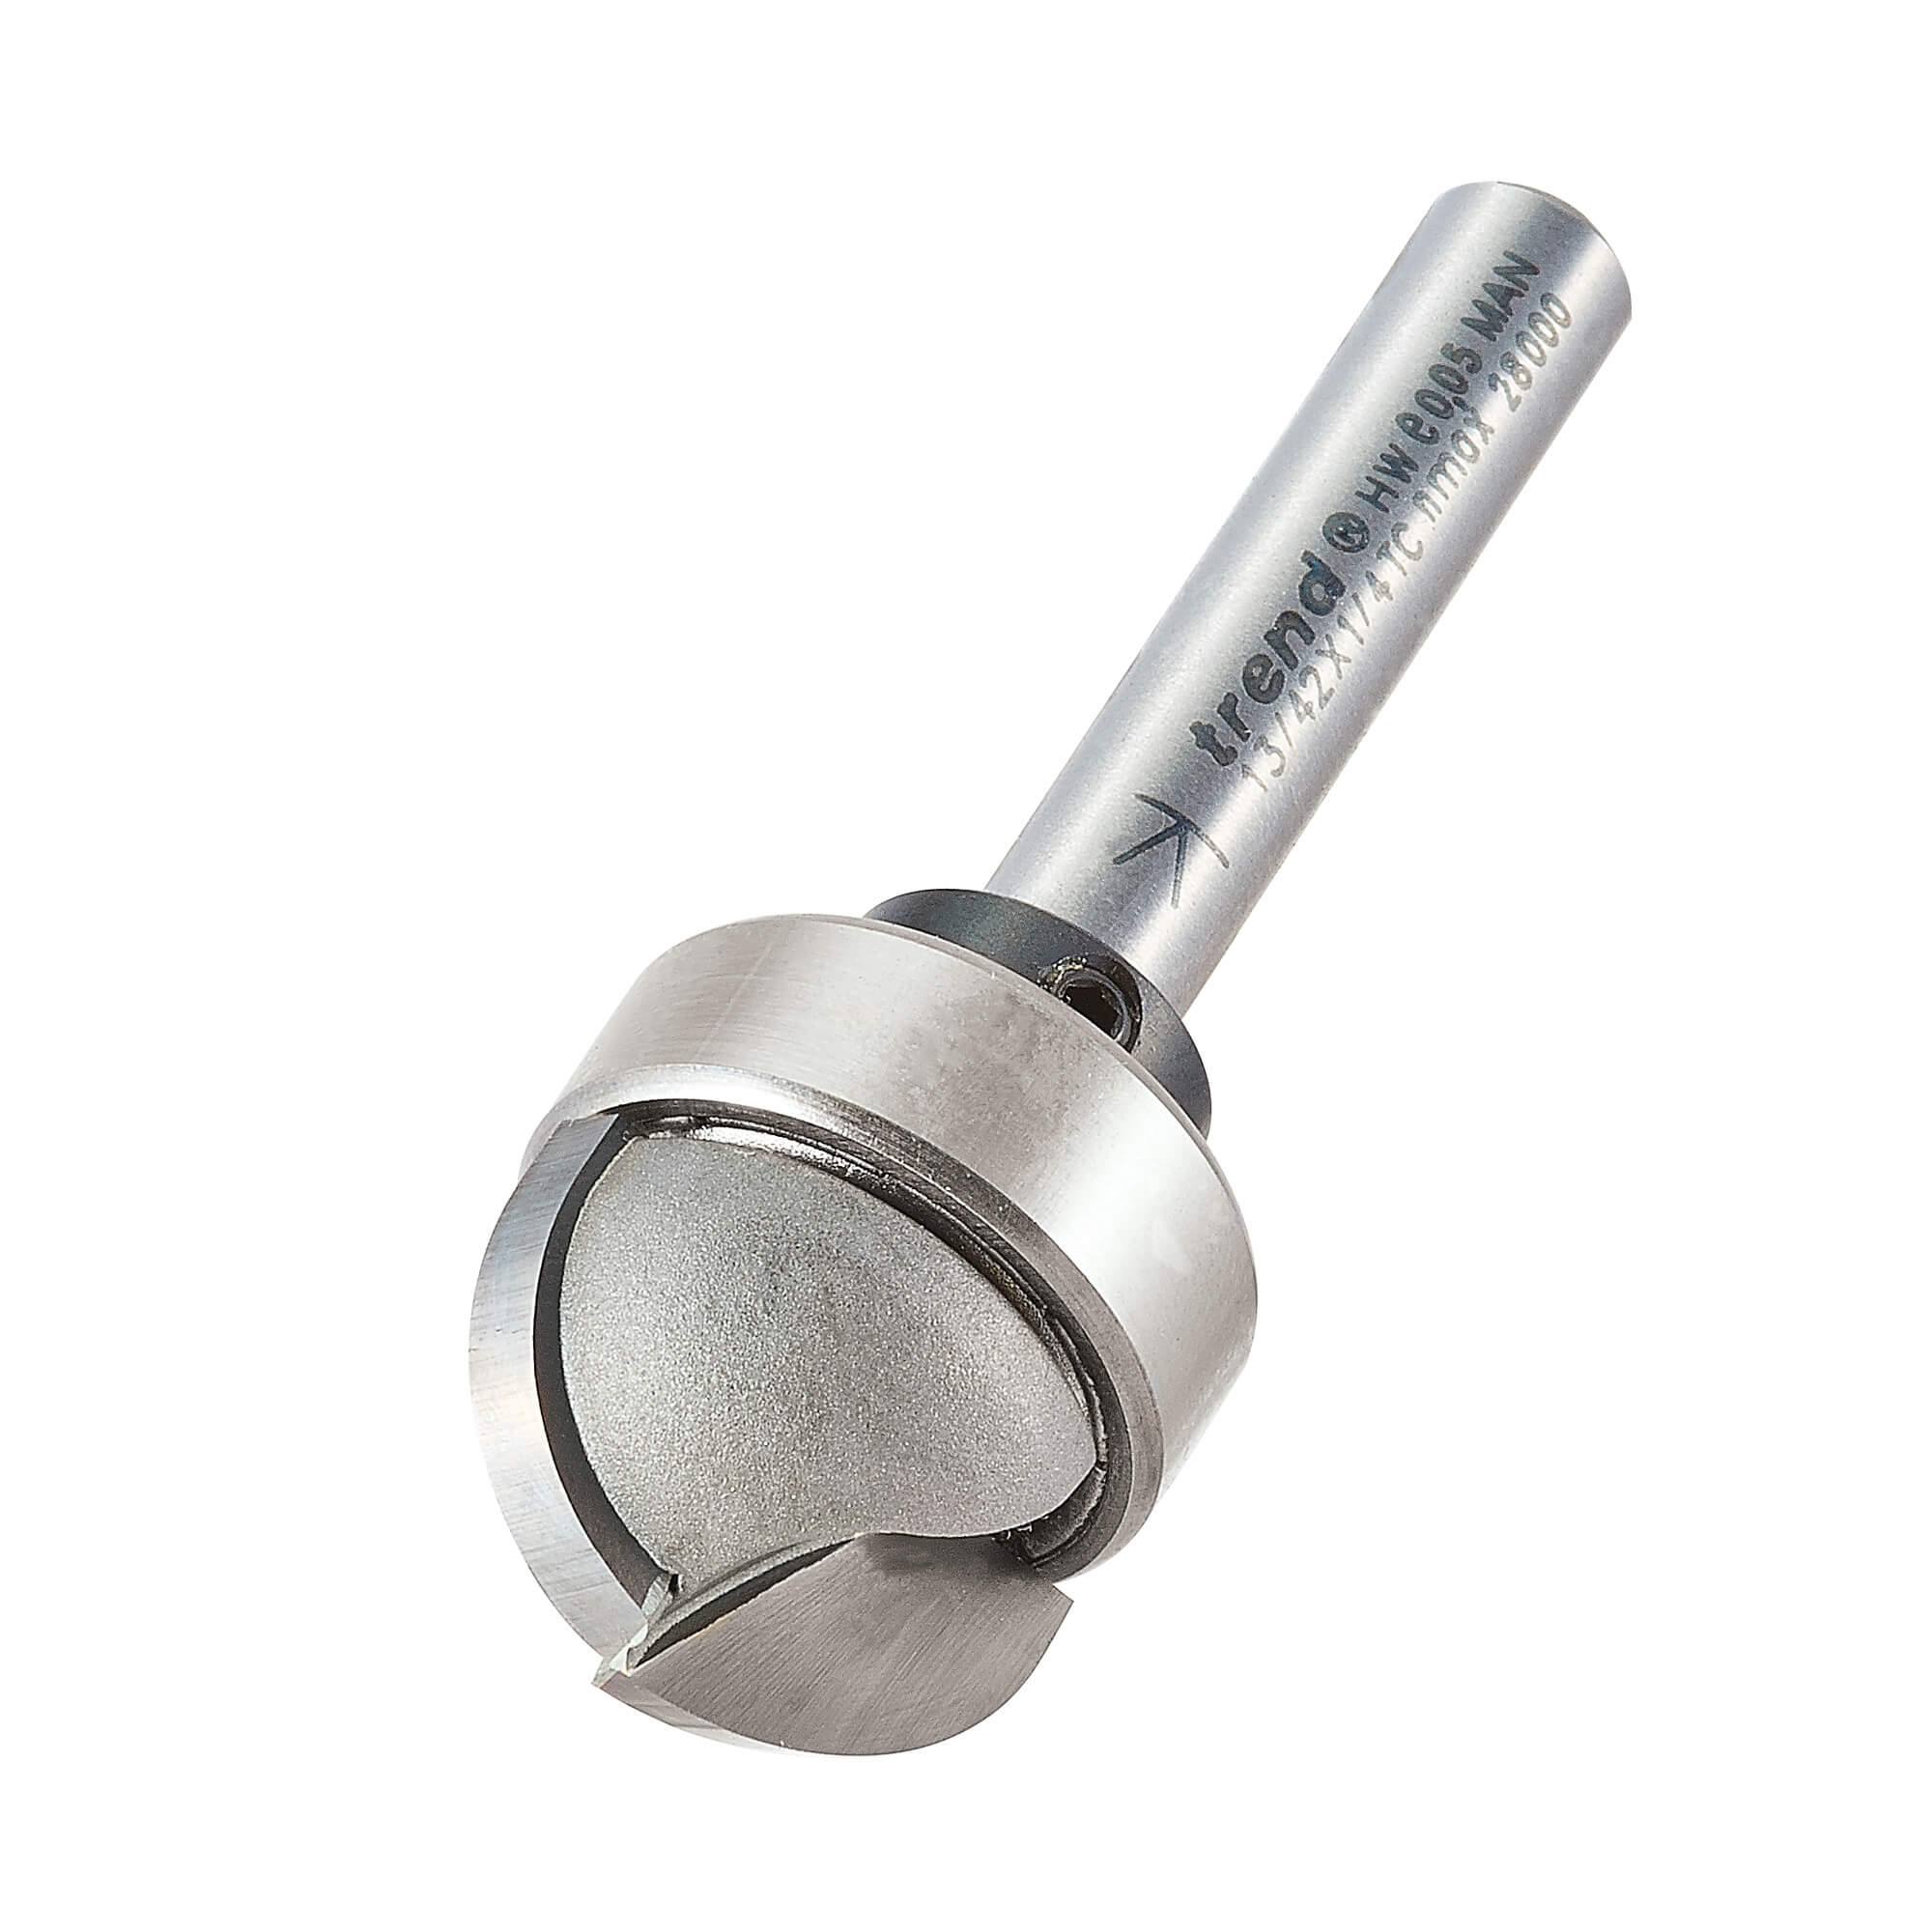 Image of Trend Radius Bearing Guided Router Cutter 19mm 11mm 1/4"